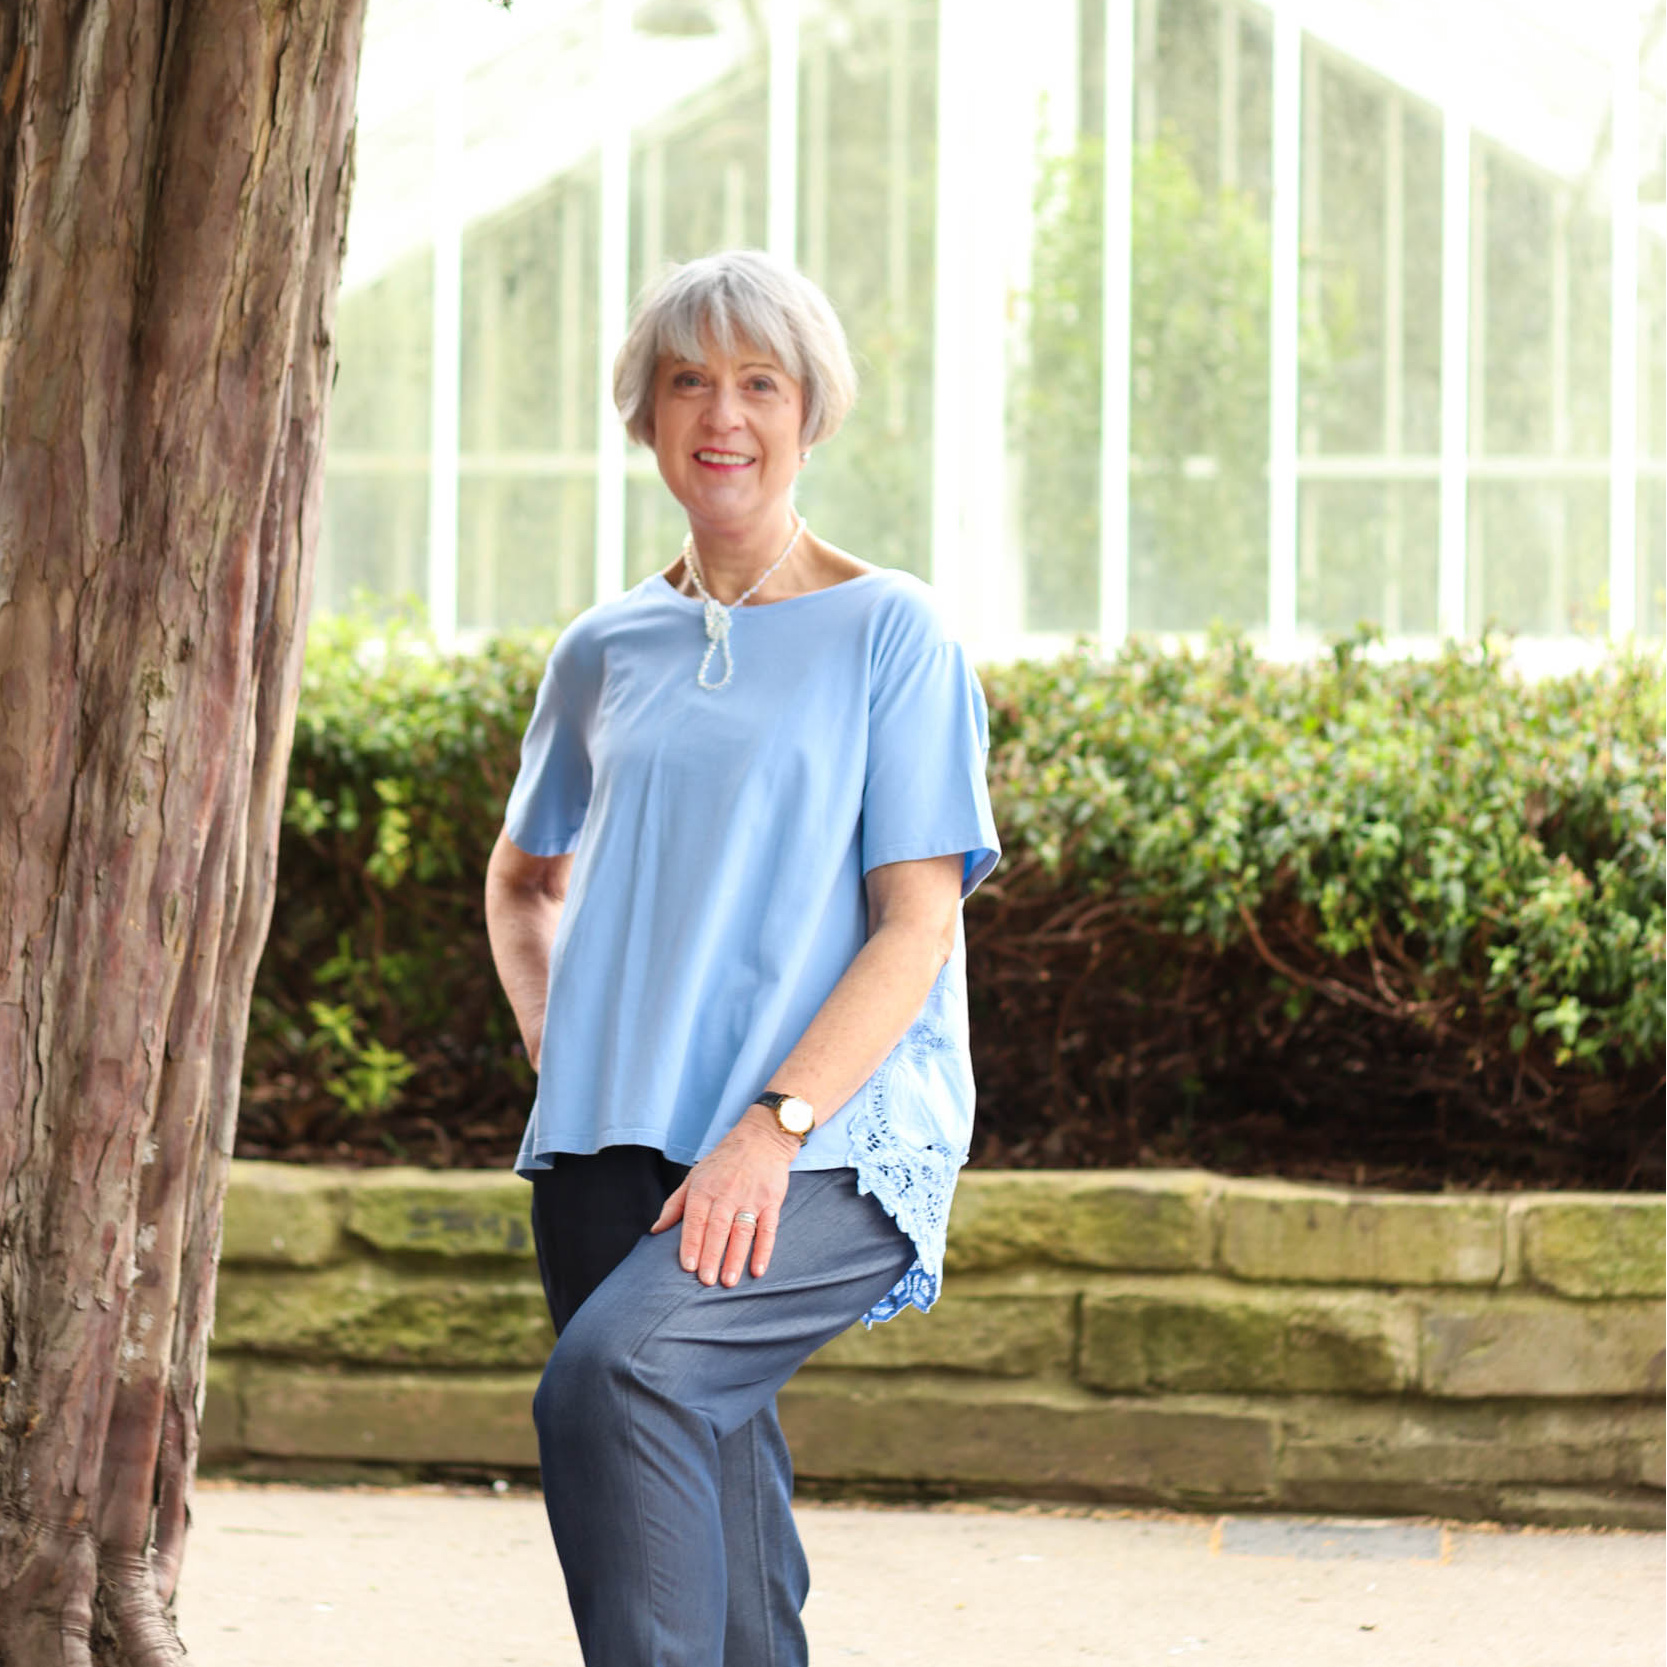 How to style a fresh and cheerful feminine top - Chic at any age